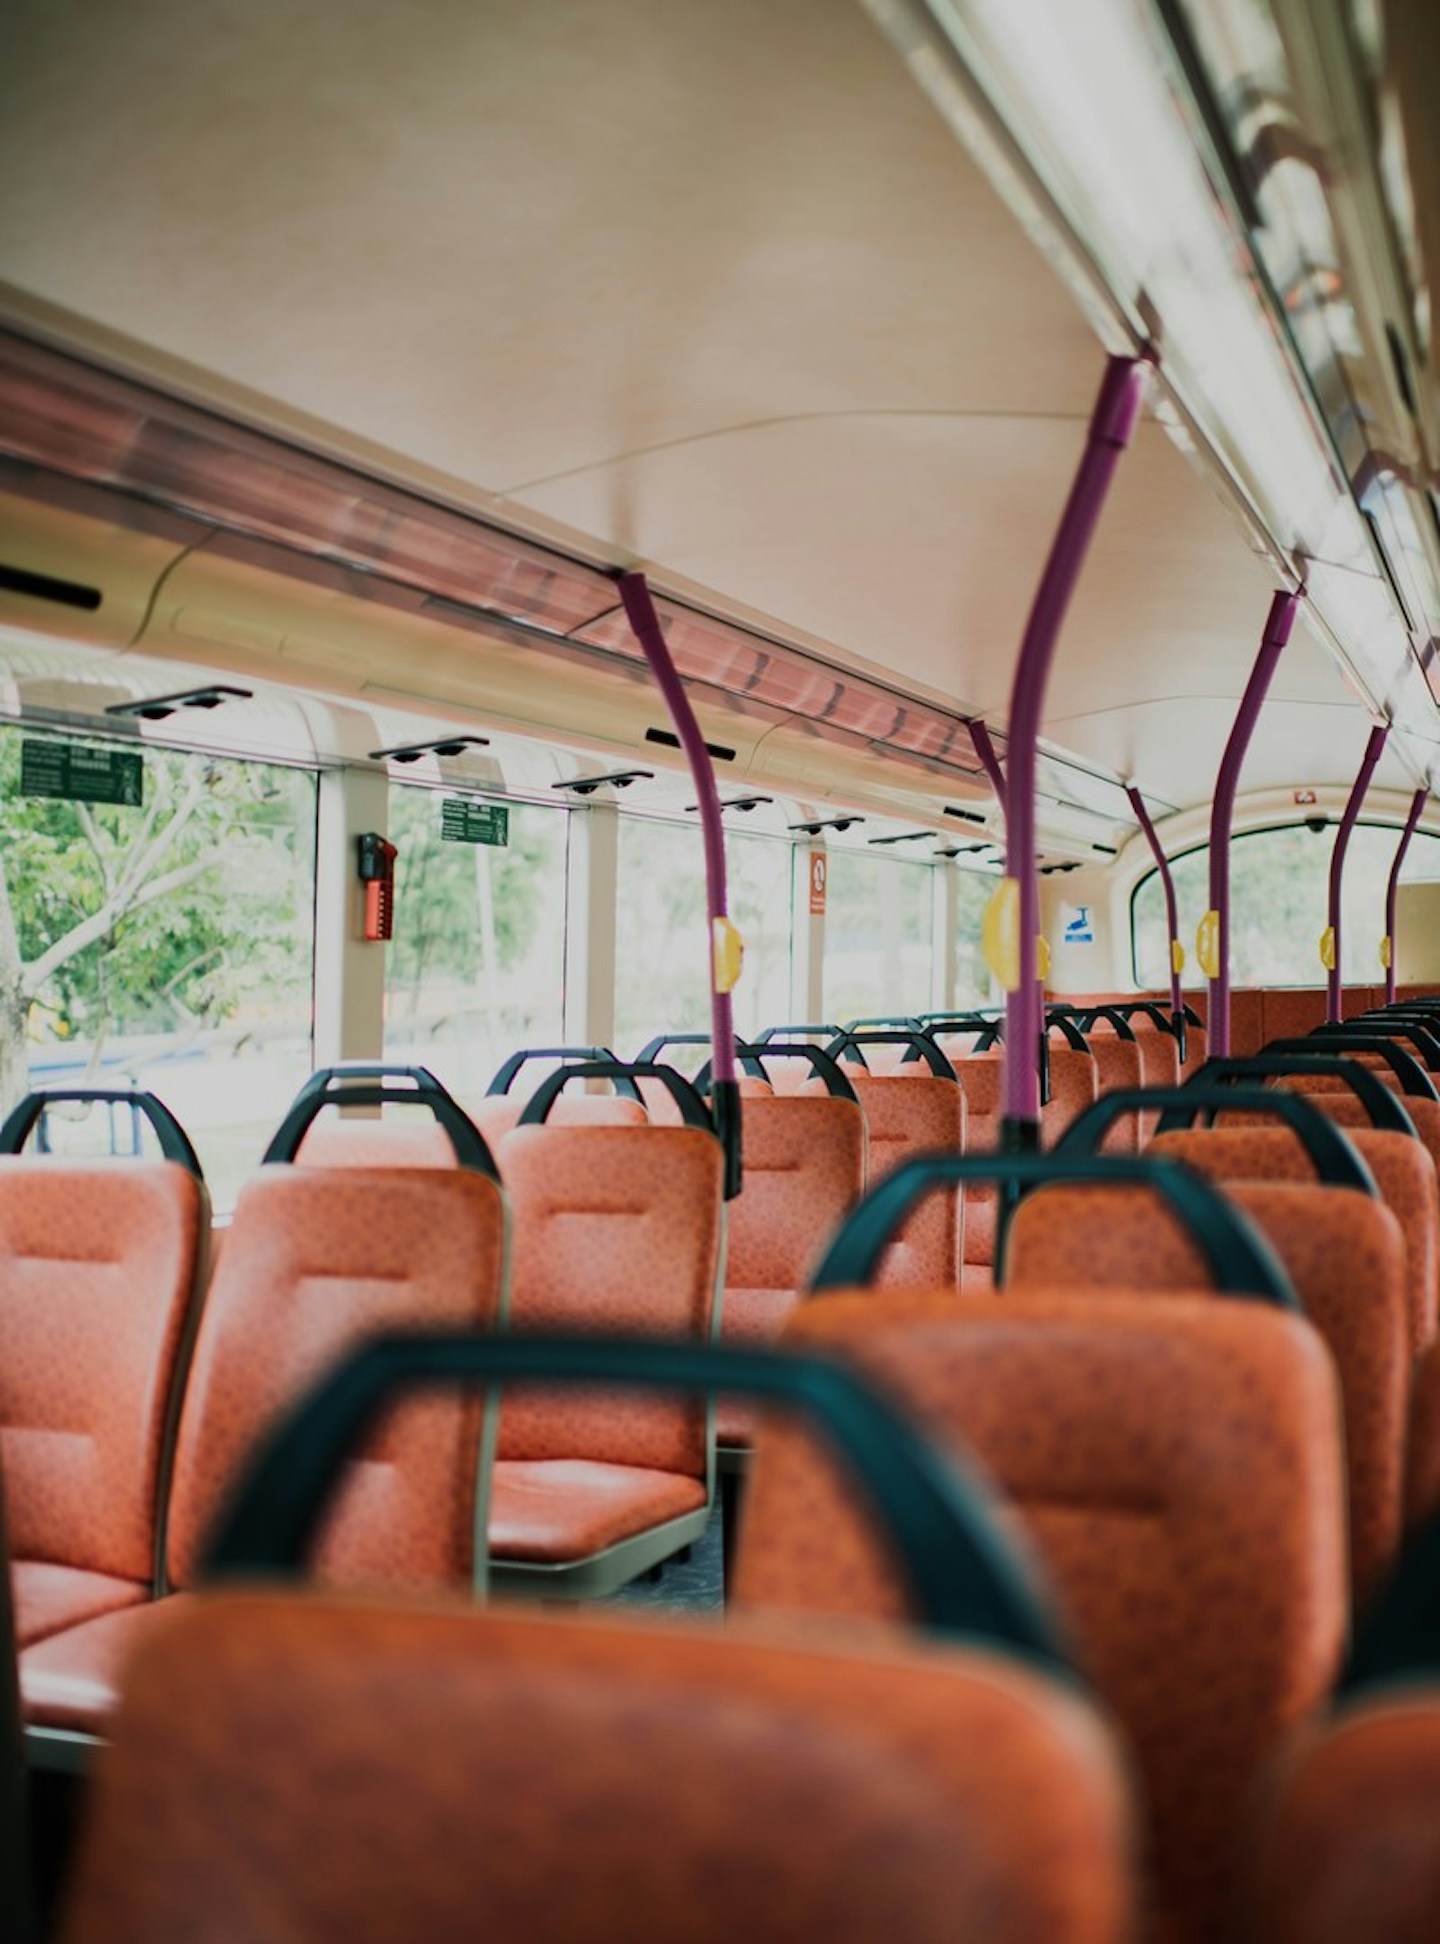 6 easy ways to have a sustainable life: take the bus